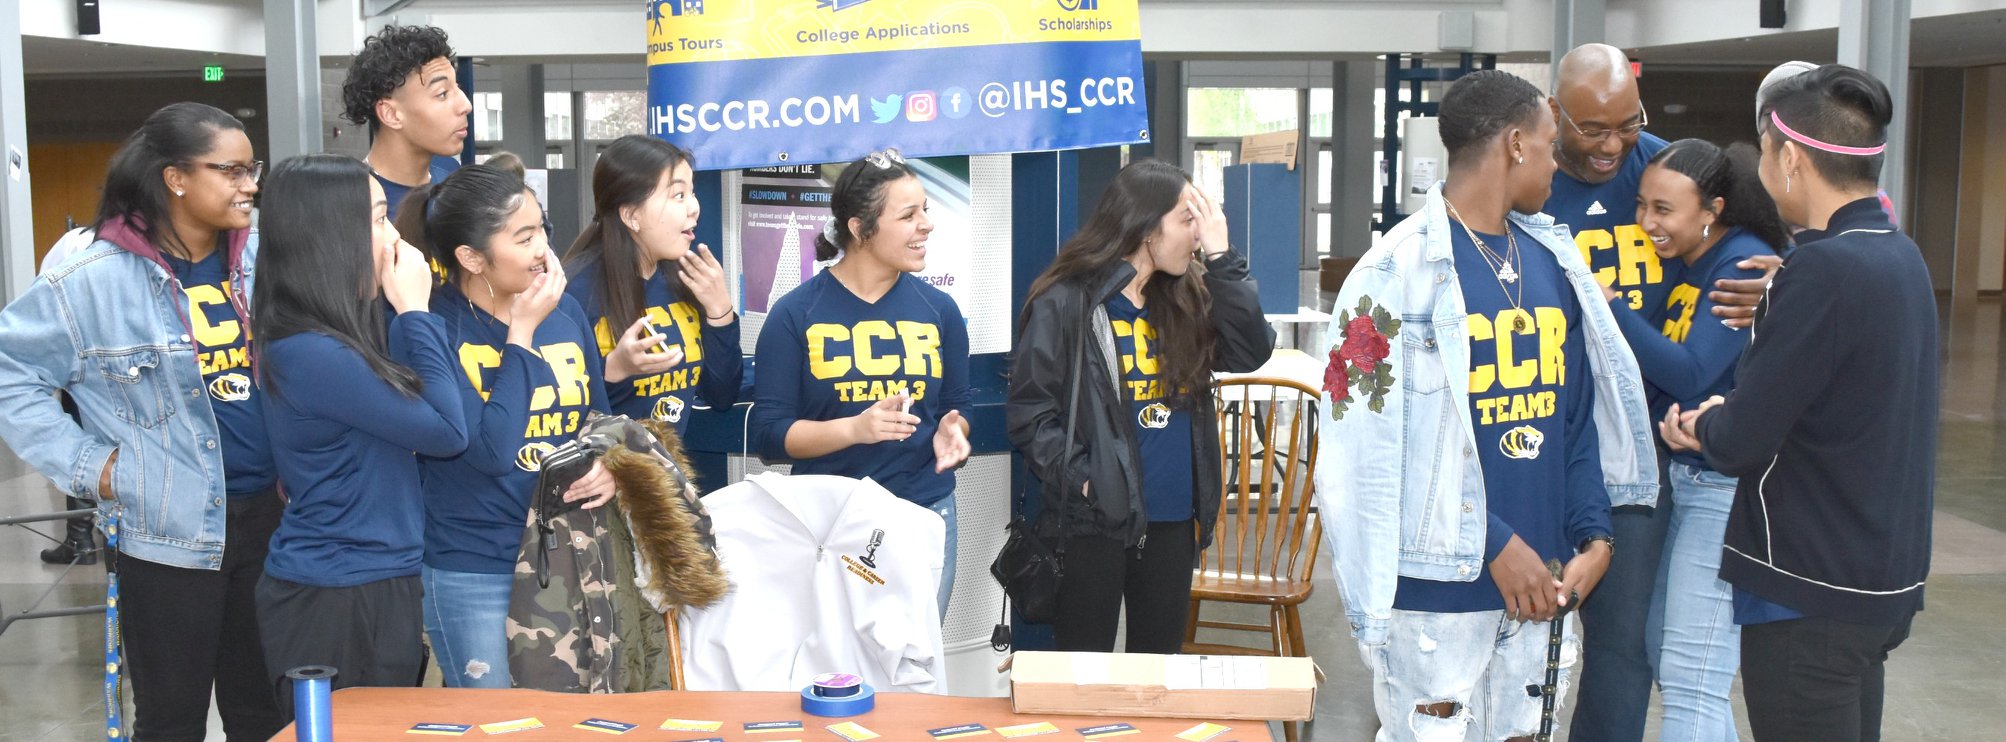 Inderkum High CCR students standing at Open House